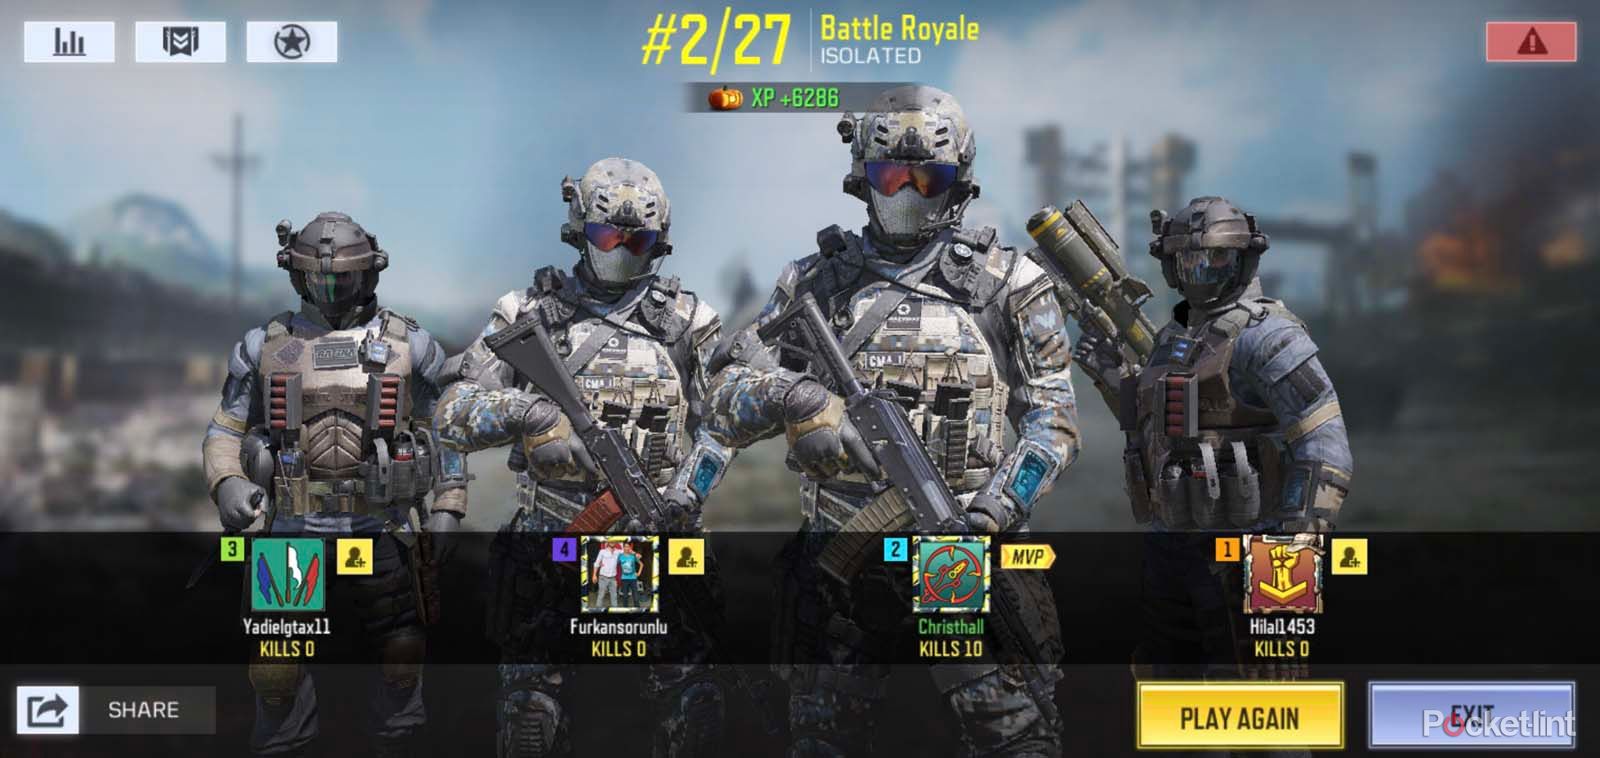 Call of duty mobile screens image 6